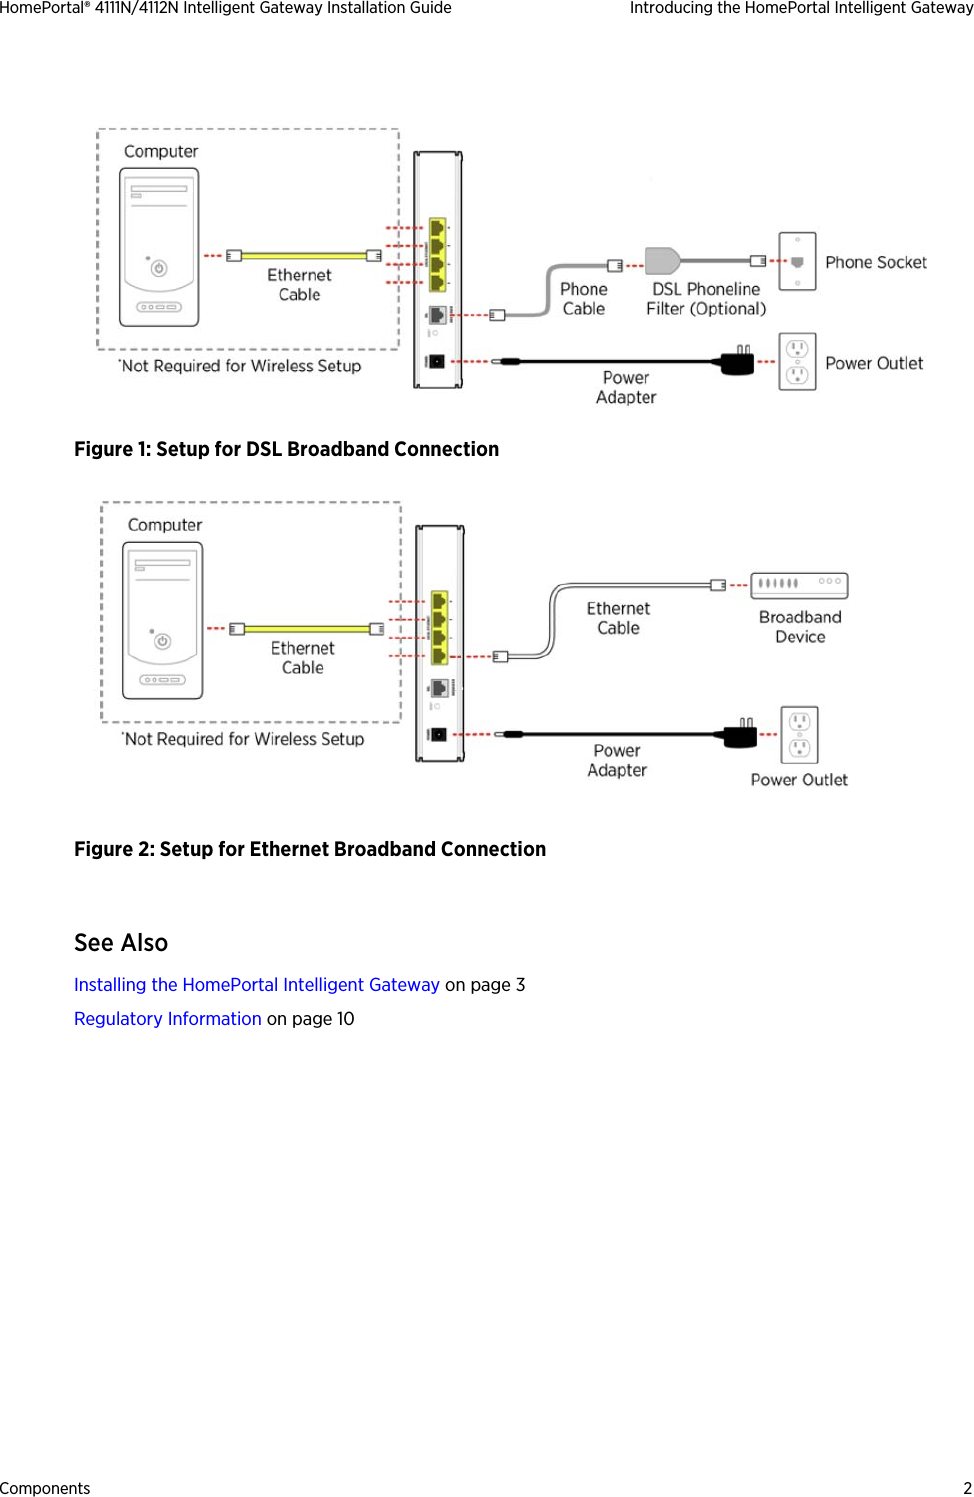 Components 2HomePortal® 4111N/4112N Intelligent Gateway Installation Guide Introducing the HomePortal Intelligent GatewayFigure 1: Setup for DSL Broadband ConnectionFigure 2: Setup for Ethernet Broadband ConnectionSee AlsoInstalling the HomePortal Intelligent Gateway on page 3Regulatory Information on page 10